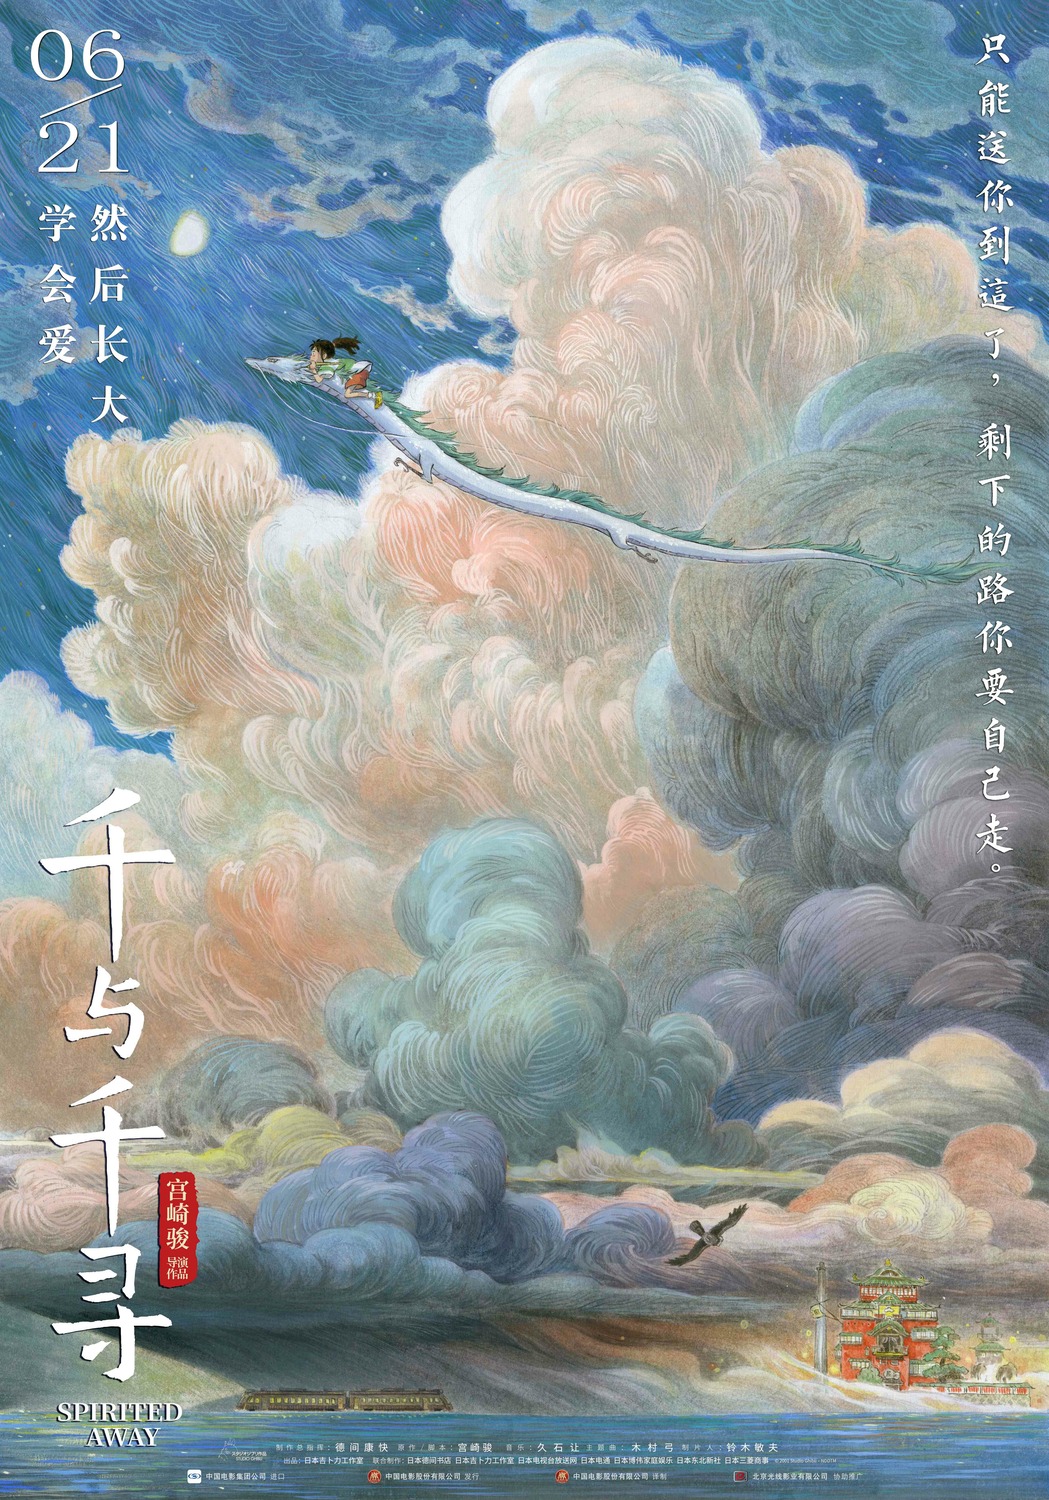 Extra Large Movie Poster Image for Spirited Away (#5 of 7)